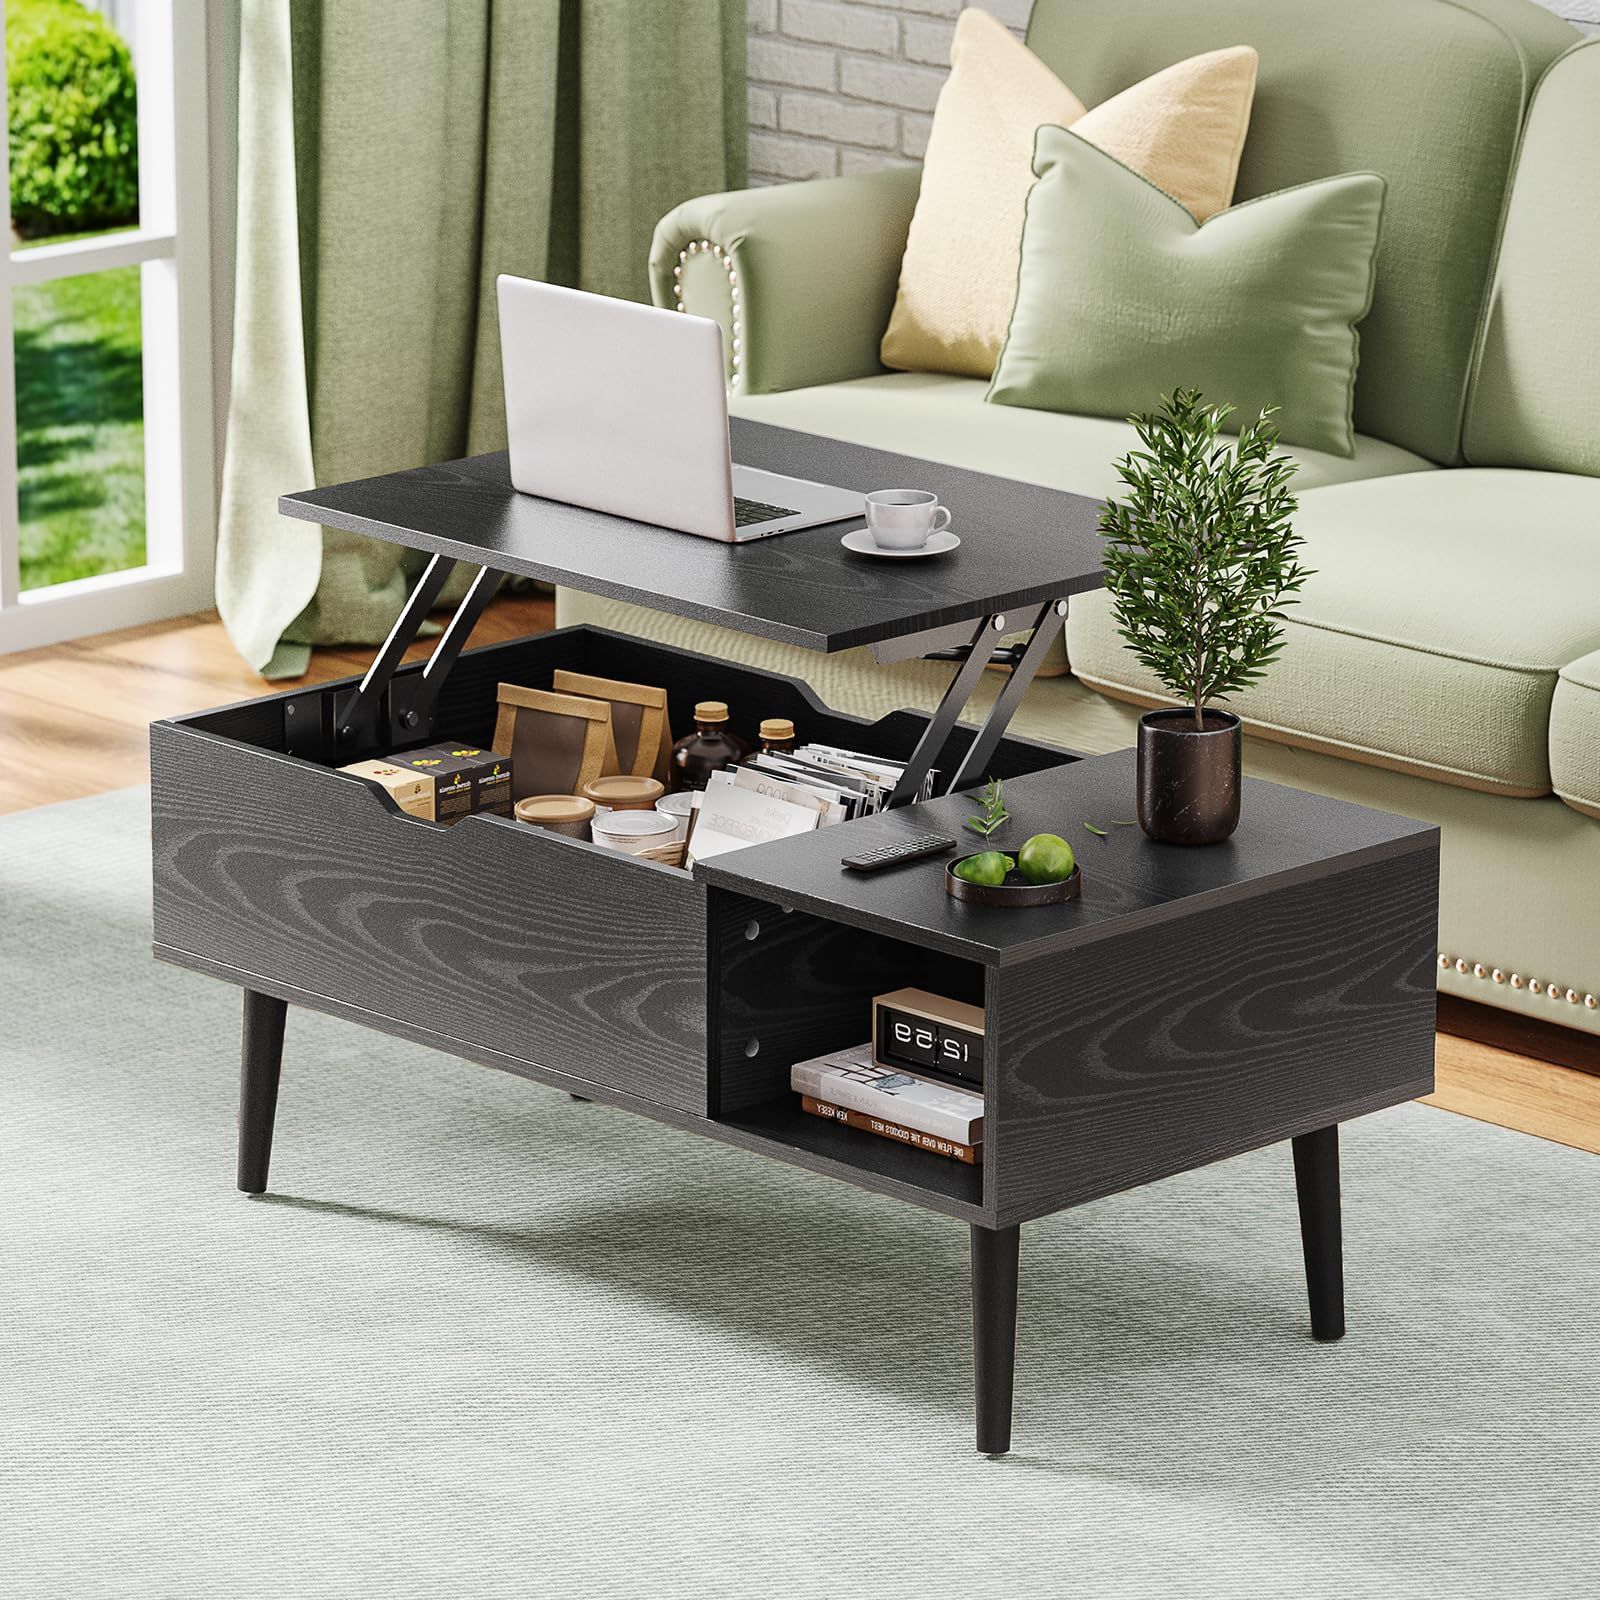 Popular Modern Wooden Lift Top Tables For Amazon: Olixis Modern Lift Top Coffee Table Wooden Furniture With  Storage Shelf And Hidden Compartment For Living Room Office, Black : Home &  Kitchen (Photo 1 of 10)